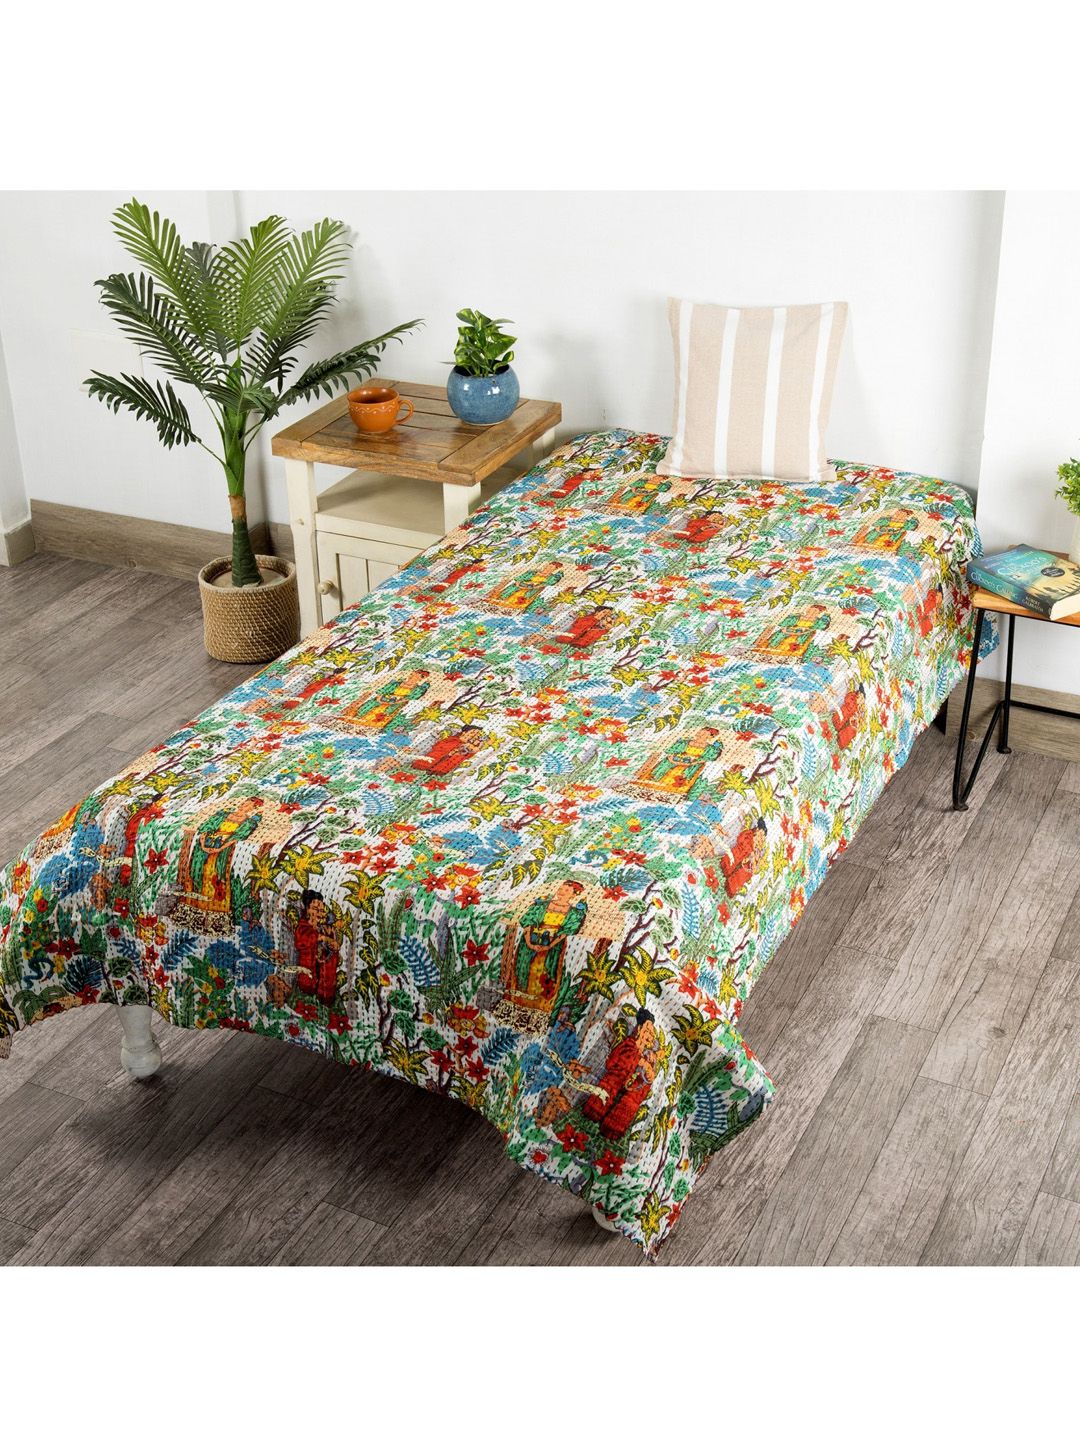 HANDICRAFT PALACE White Printed Kantha Quilted Cotton Reversible Single Bed Cover Price in India